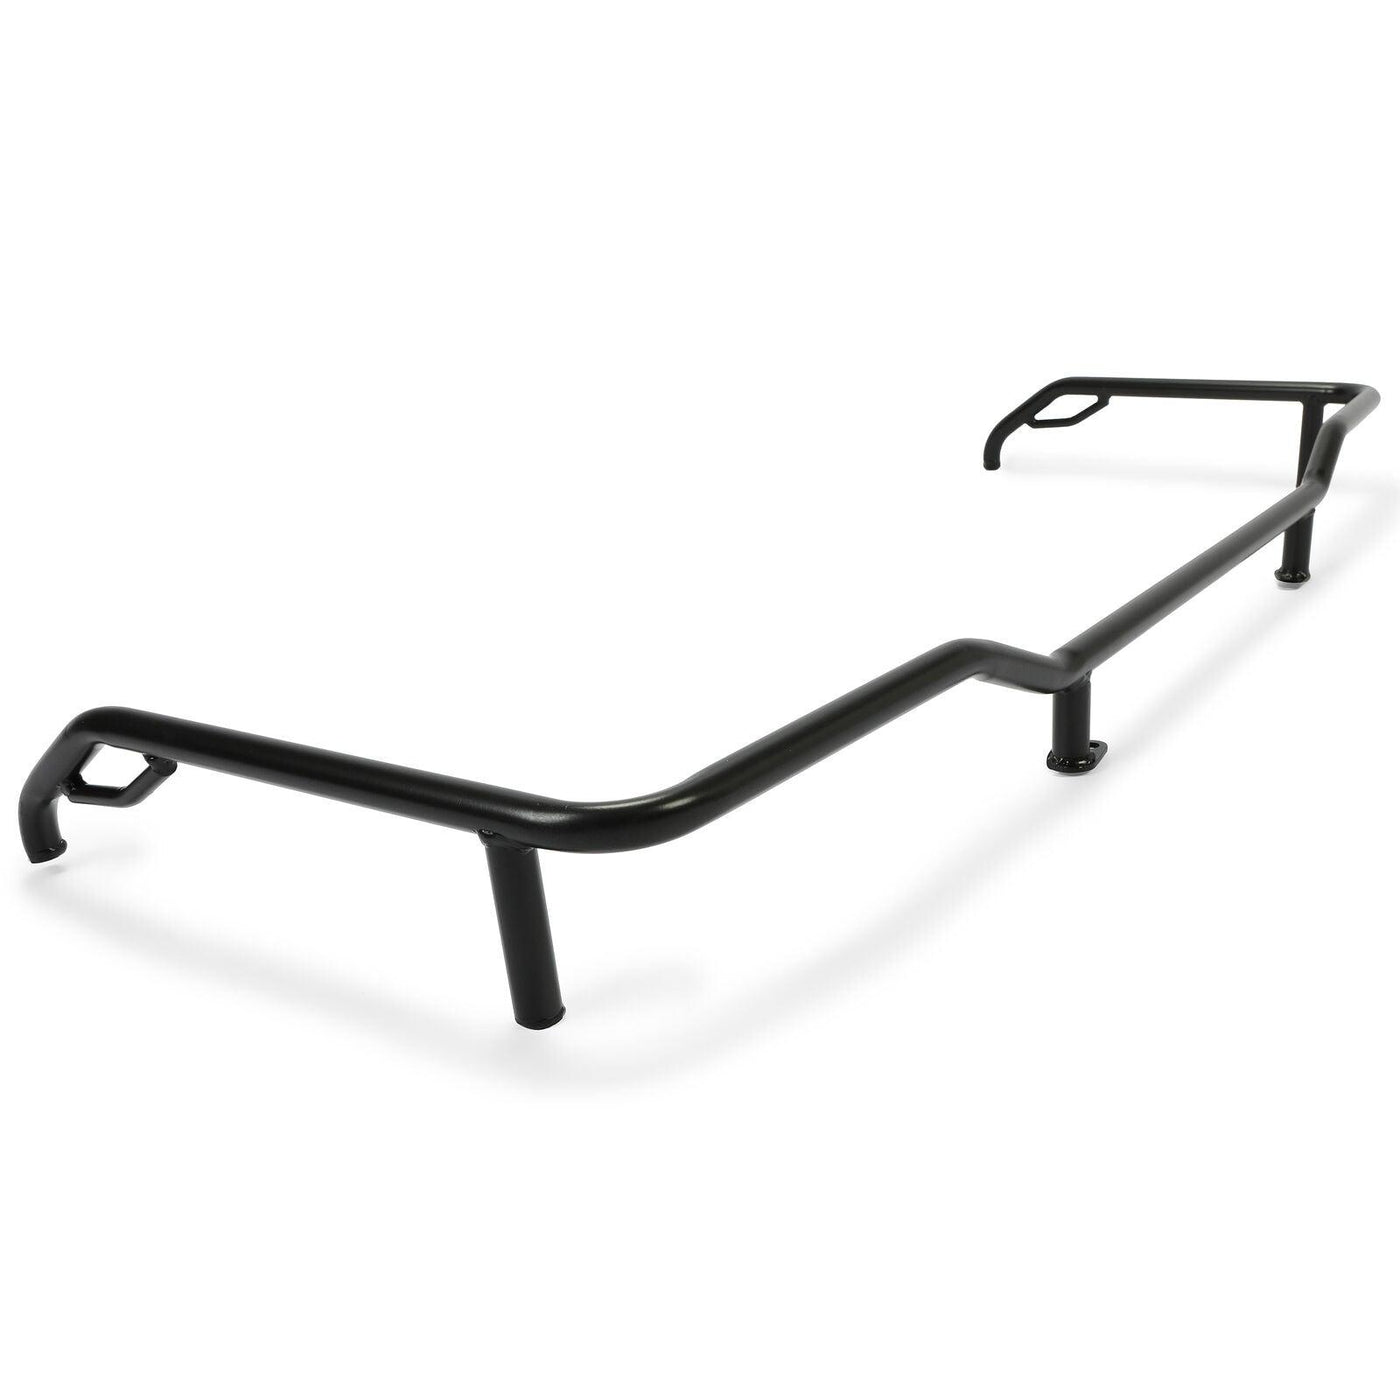 For 2014-2020 Polaris Sportsman 570 450 Rear Steel Rack Extender 2879717 - Moto Life Products